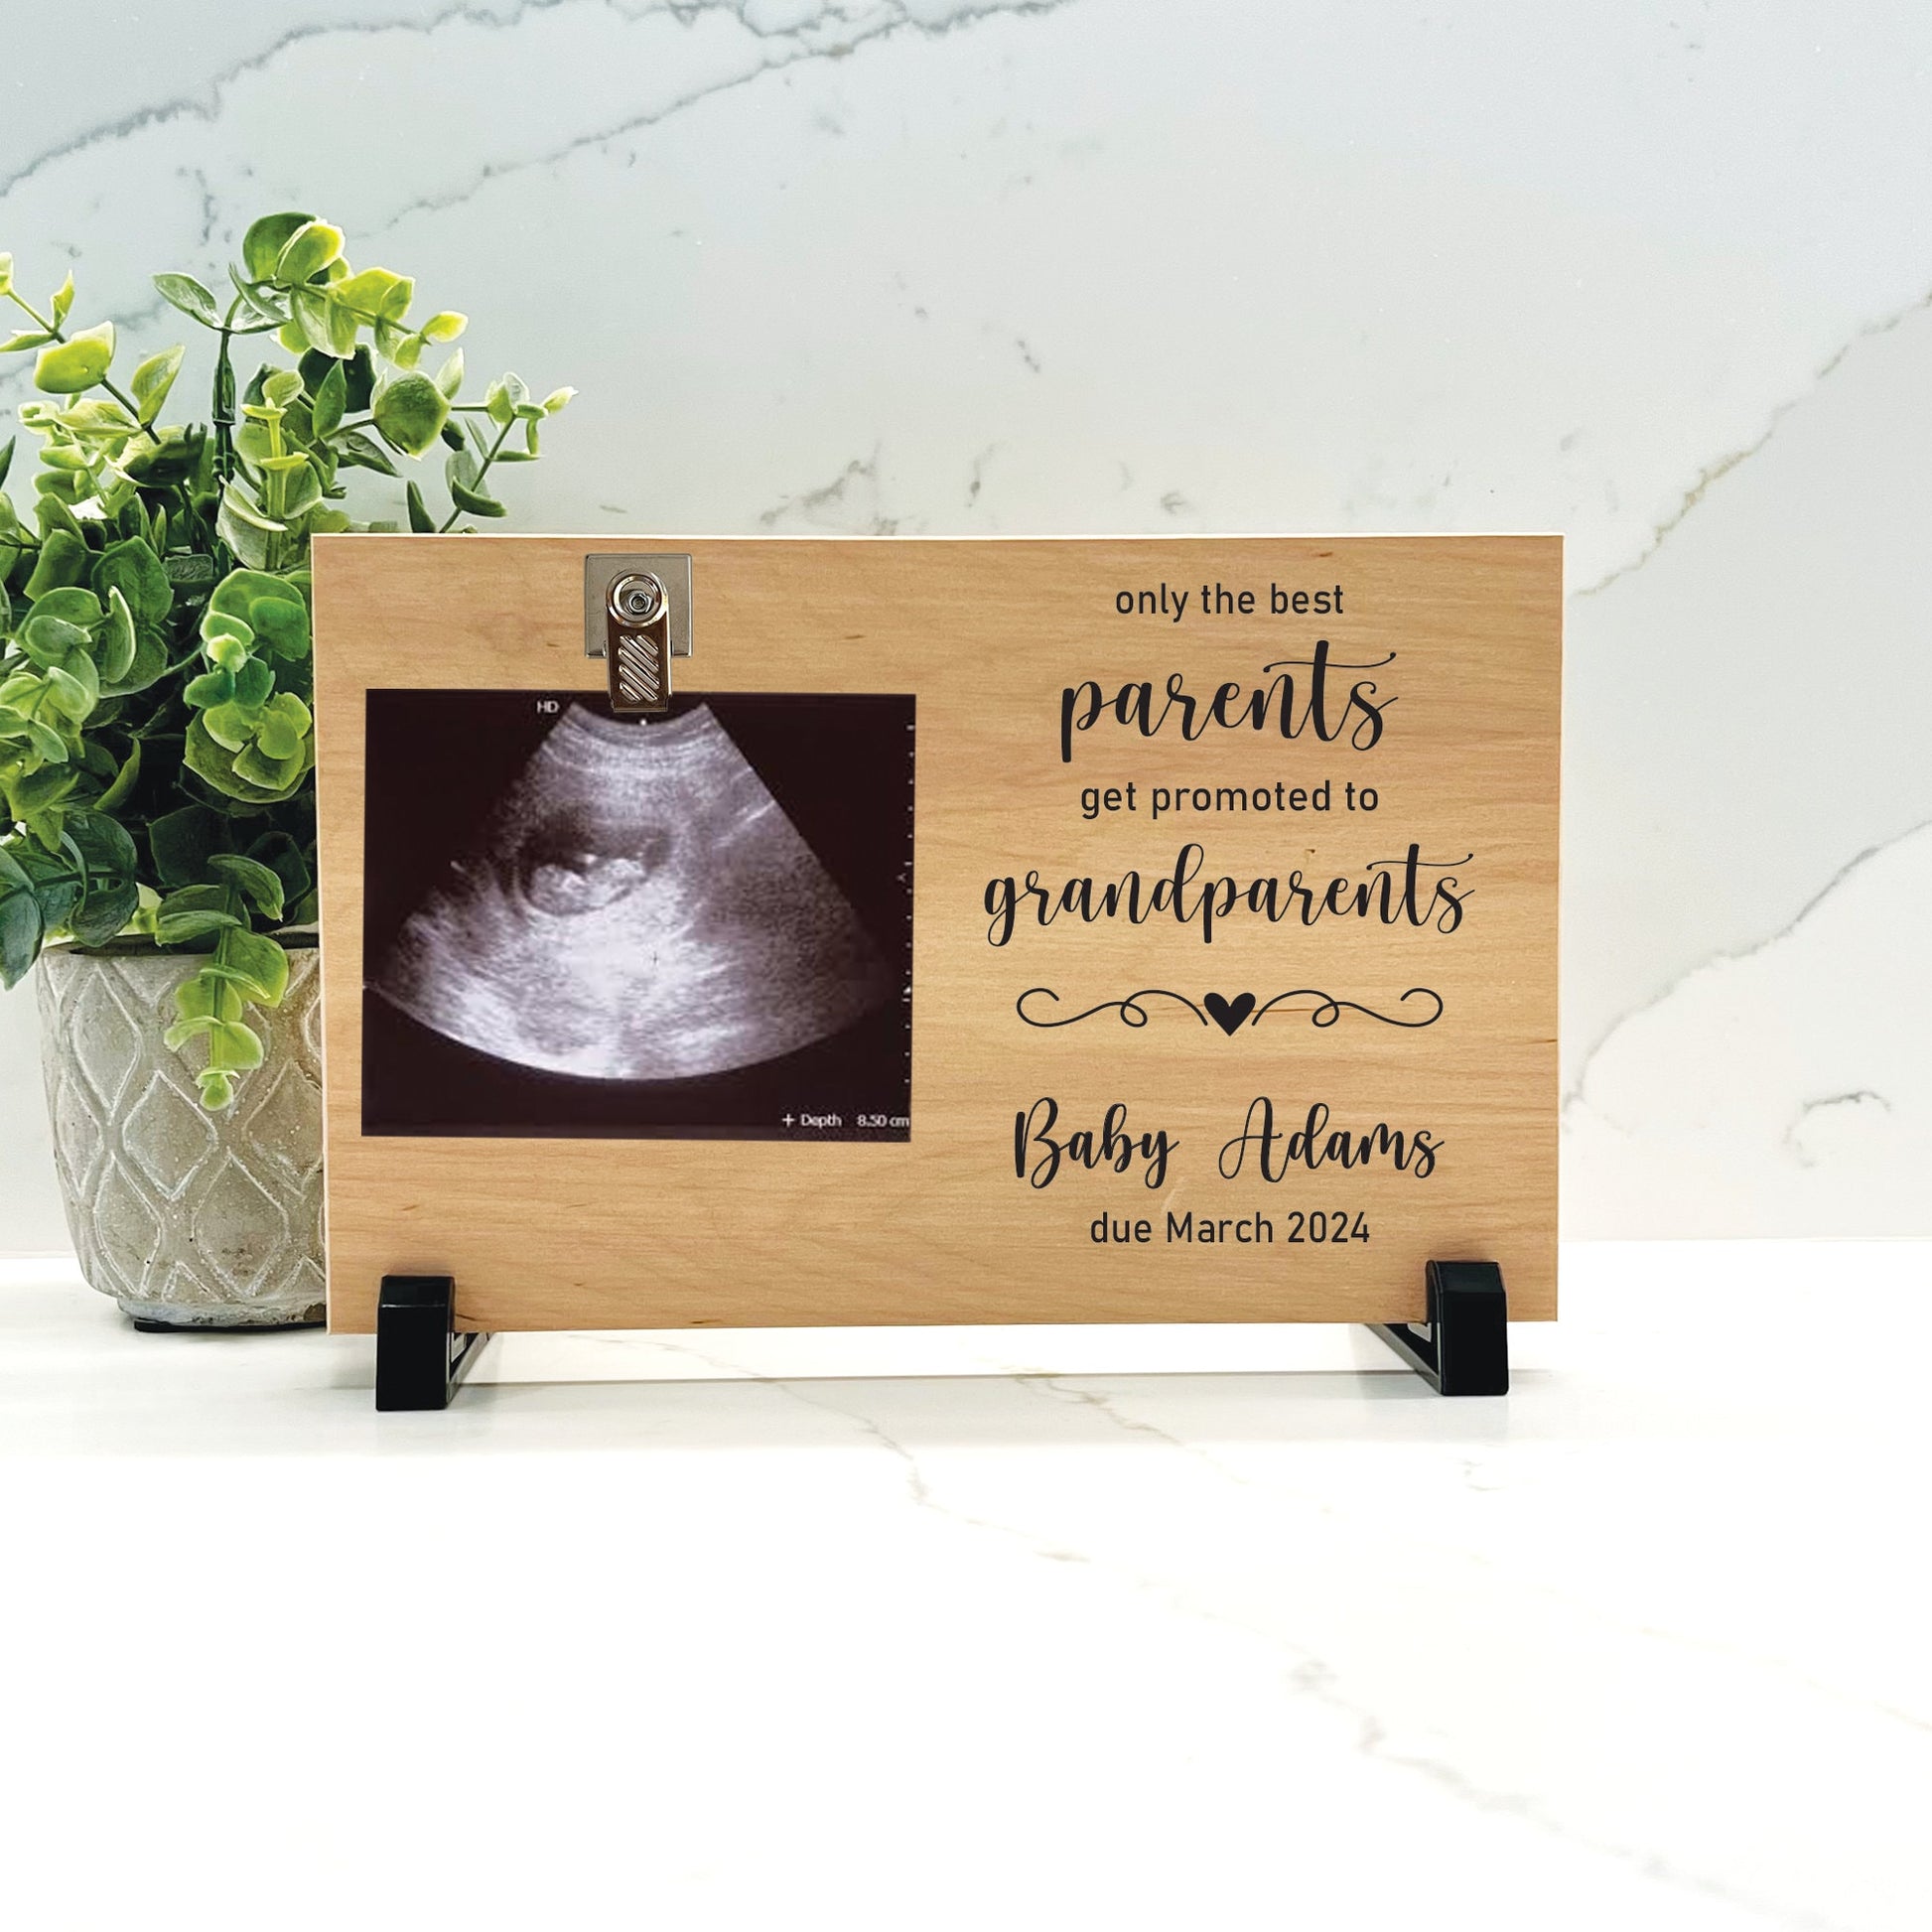 Pregnancy Reveal Gift To Parents - only the best parents get promoted to grandparents - New Grandparents Gift - Baby Sonogram Photo Frame